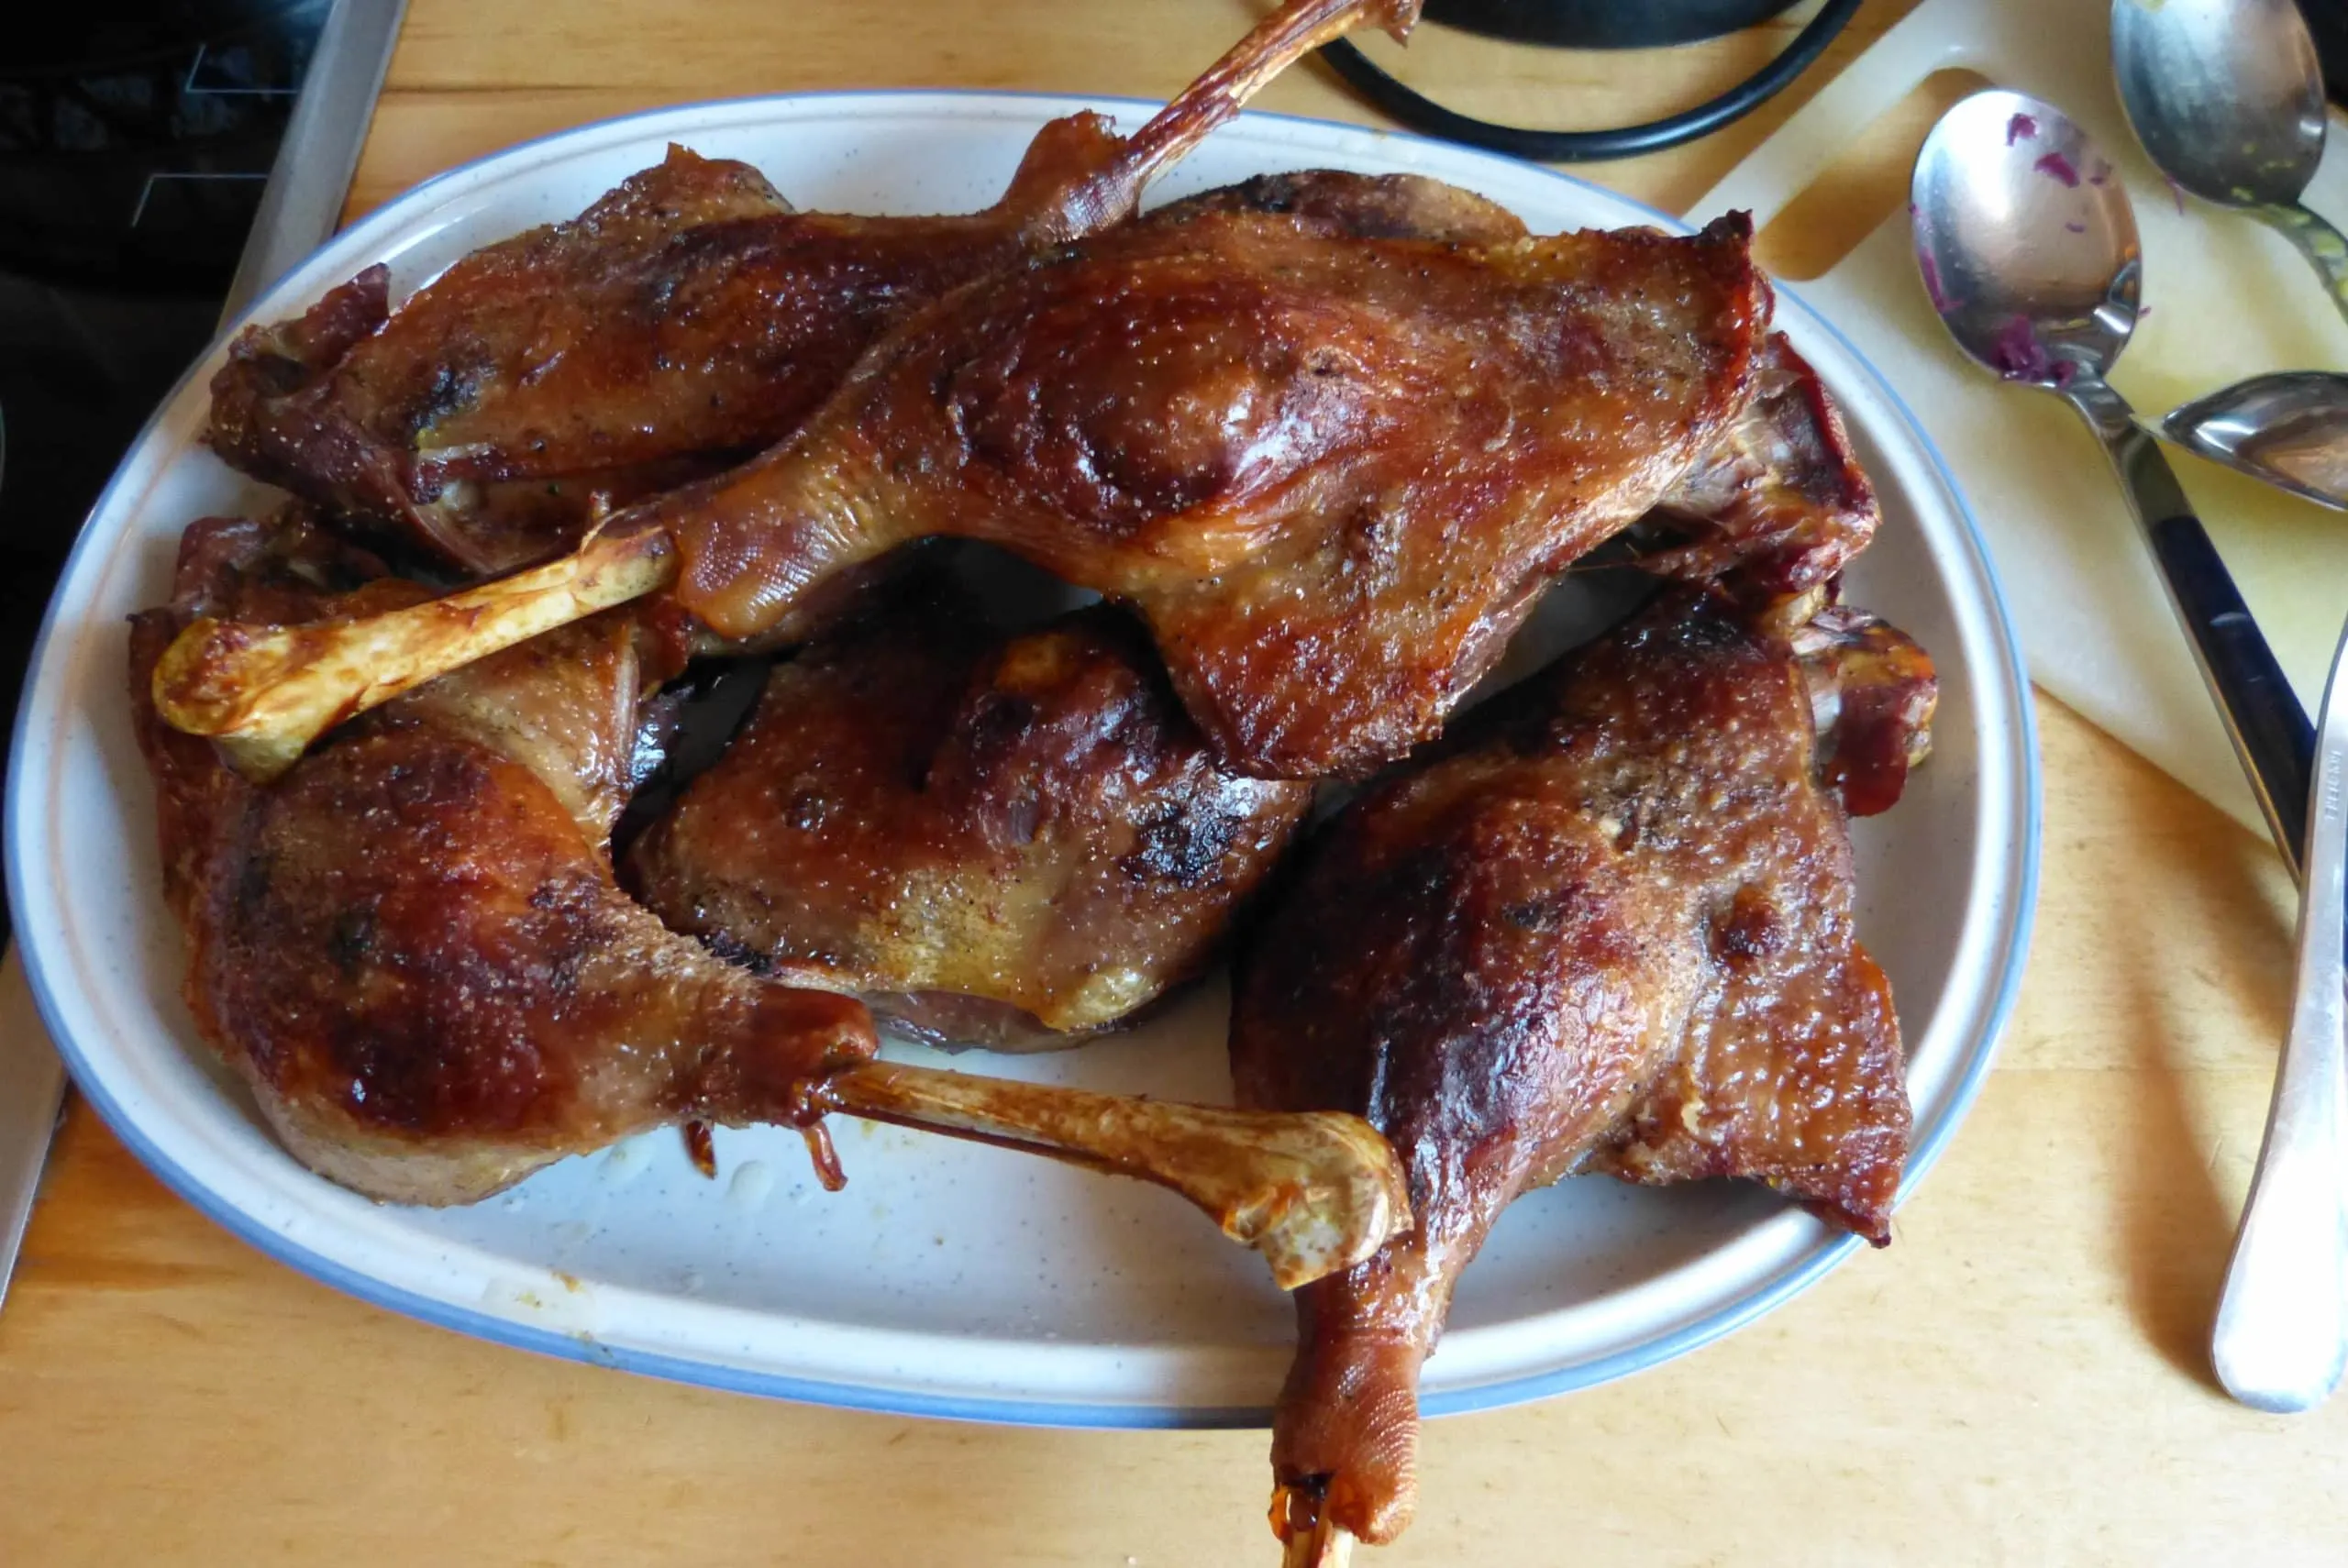 Fresh from the oven: Perfectly golden brown German roasted goose legs on a platter.